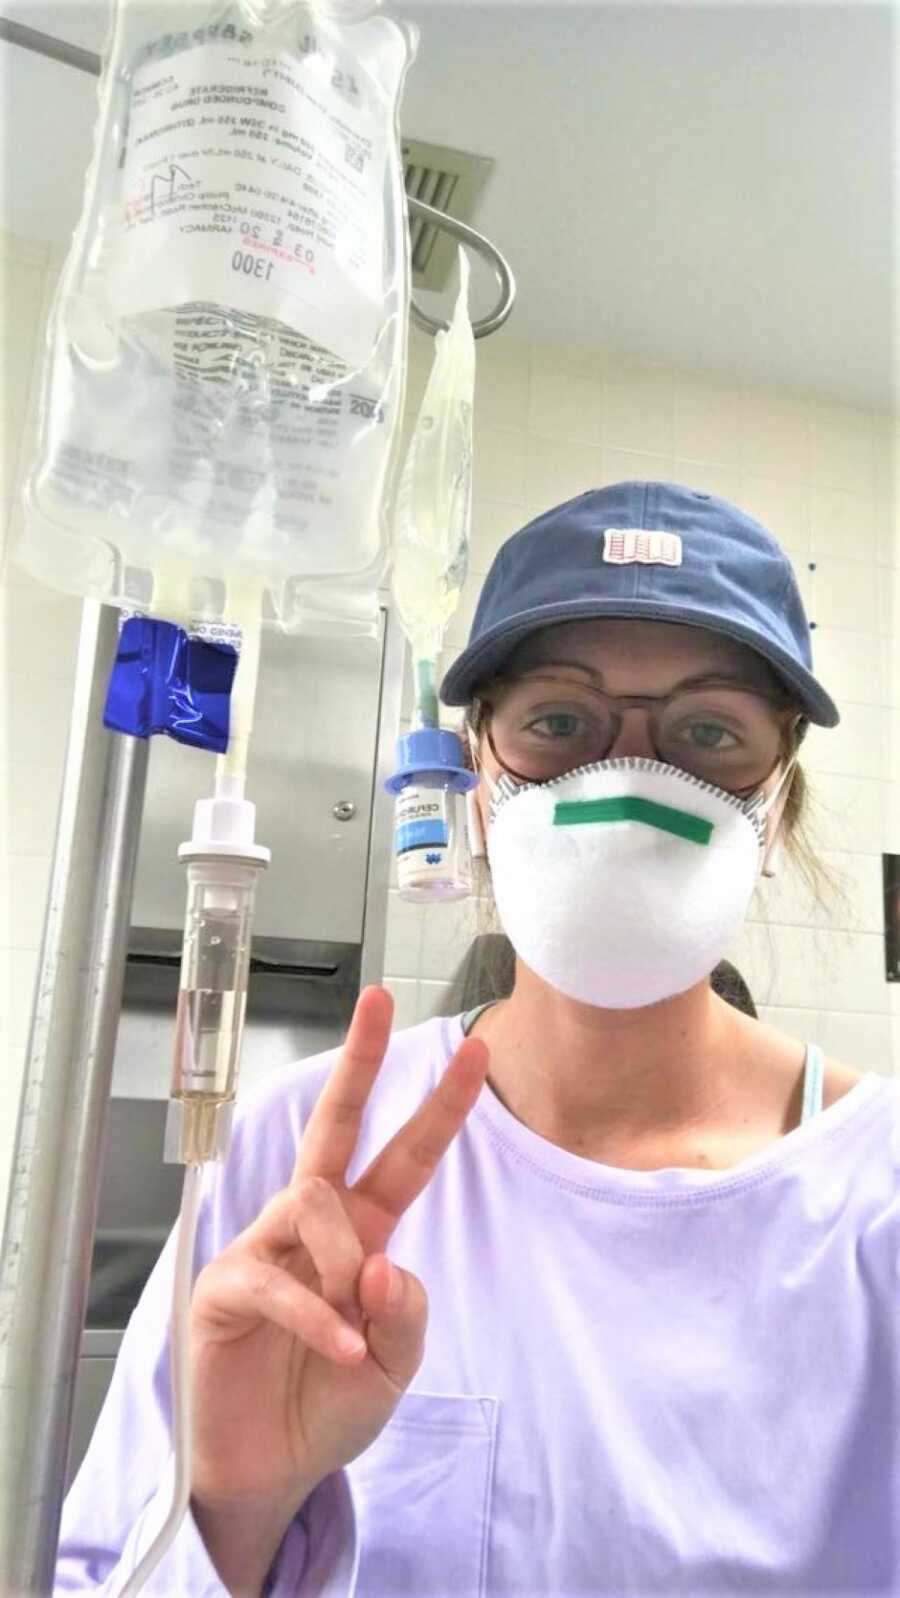 young woman battling chronic migraine at the hospital receiving IV fluids